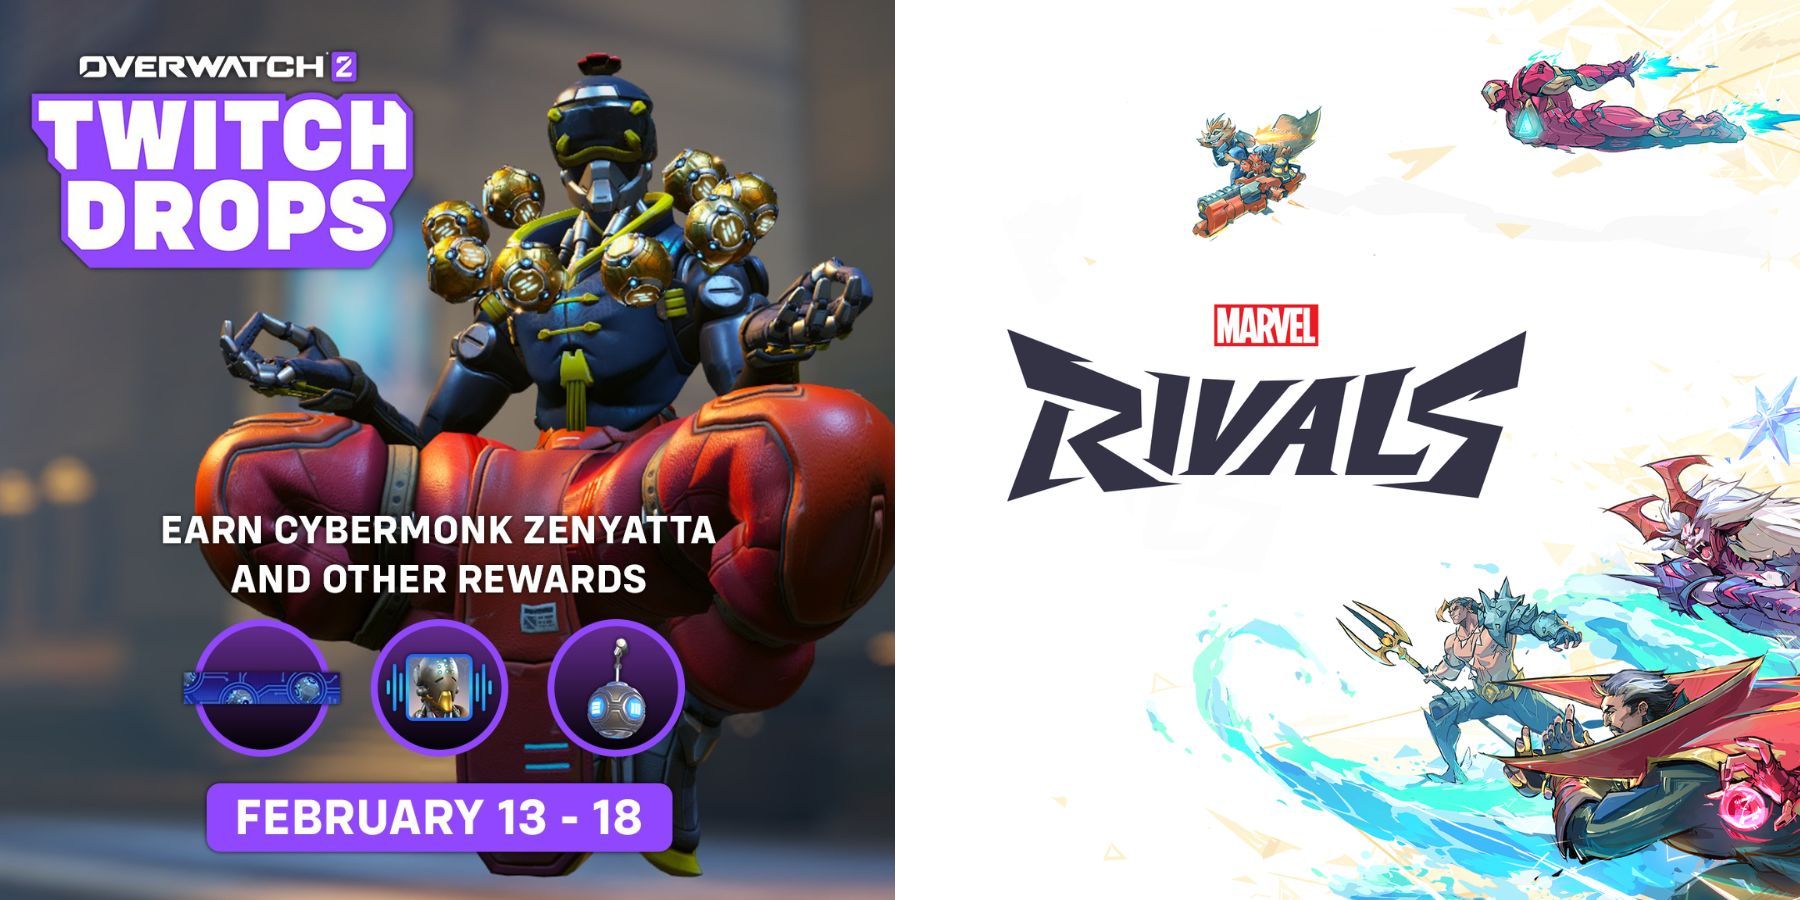 overwatch 2's twitch drop rewards would translate perfectly to marvel rivals